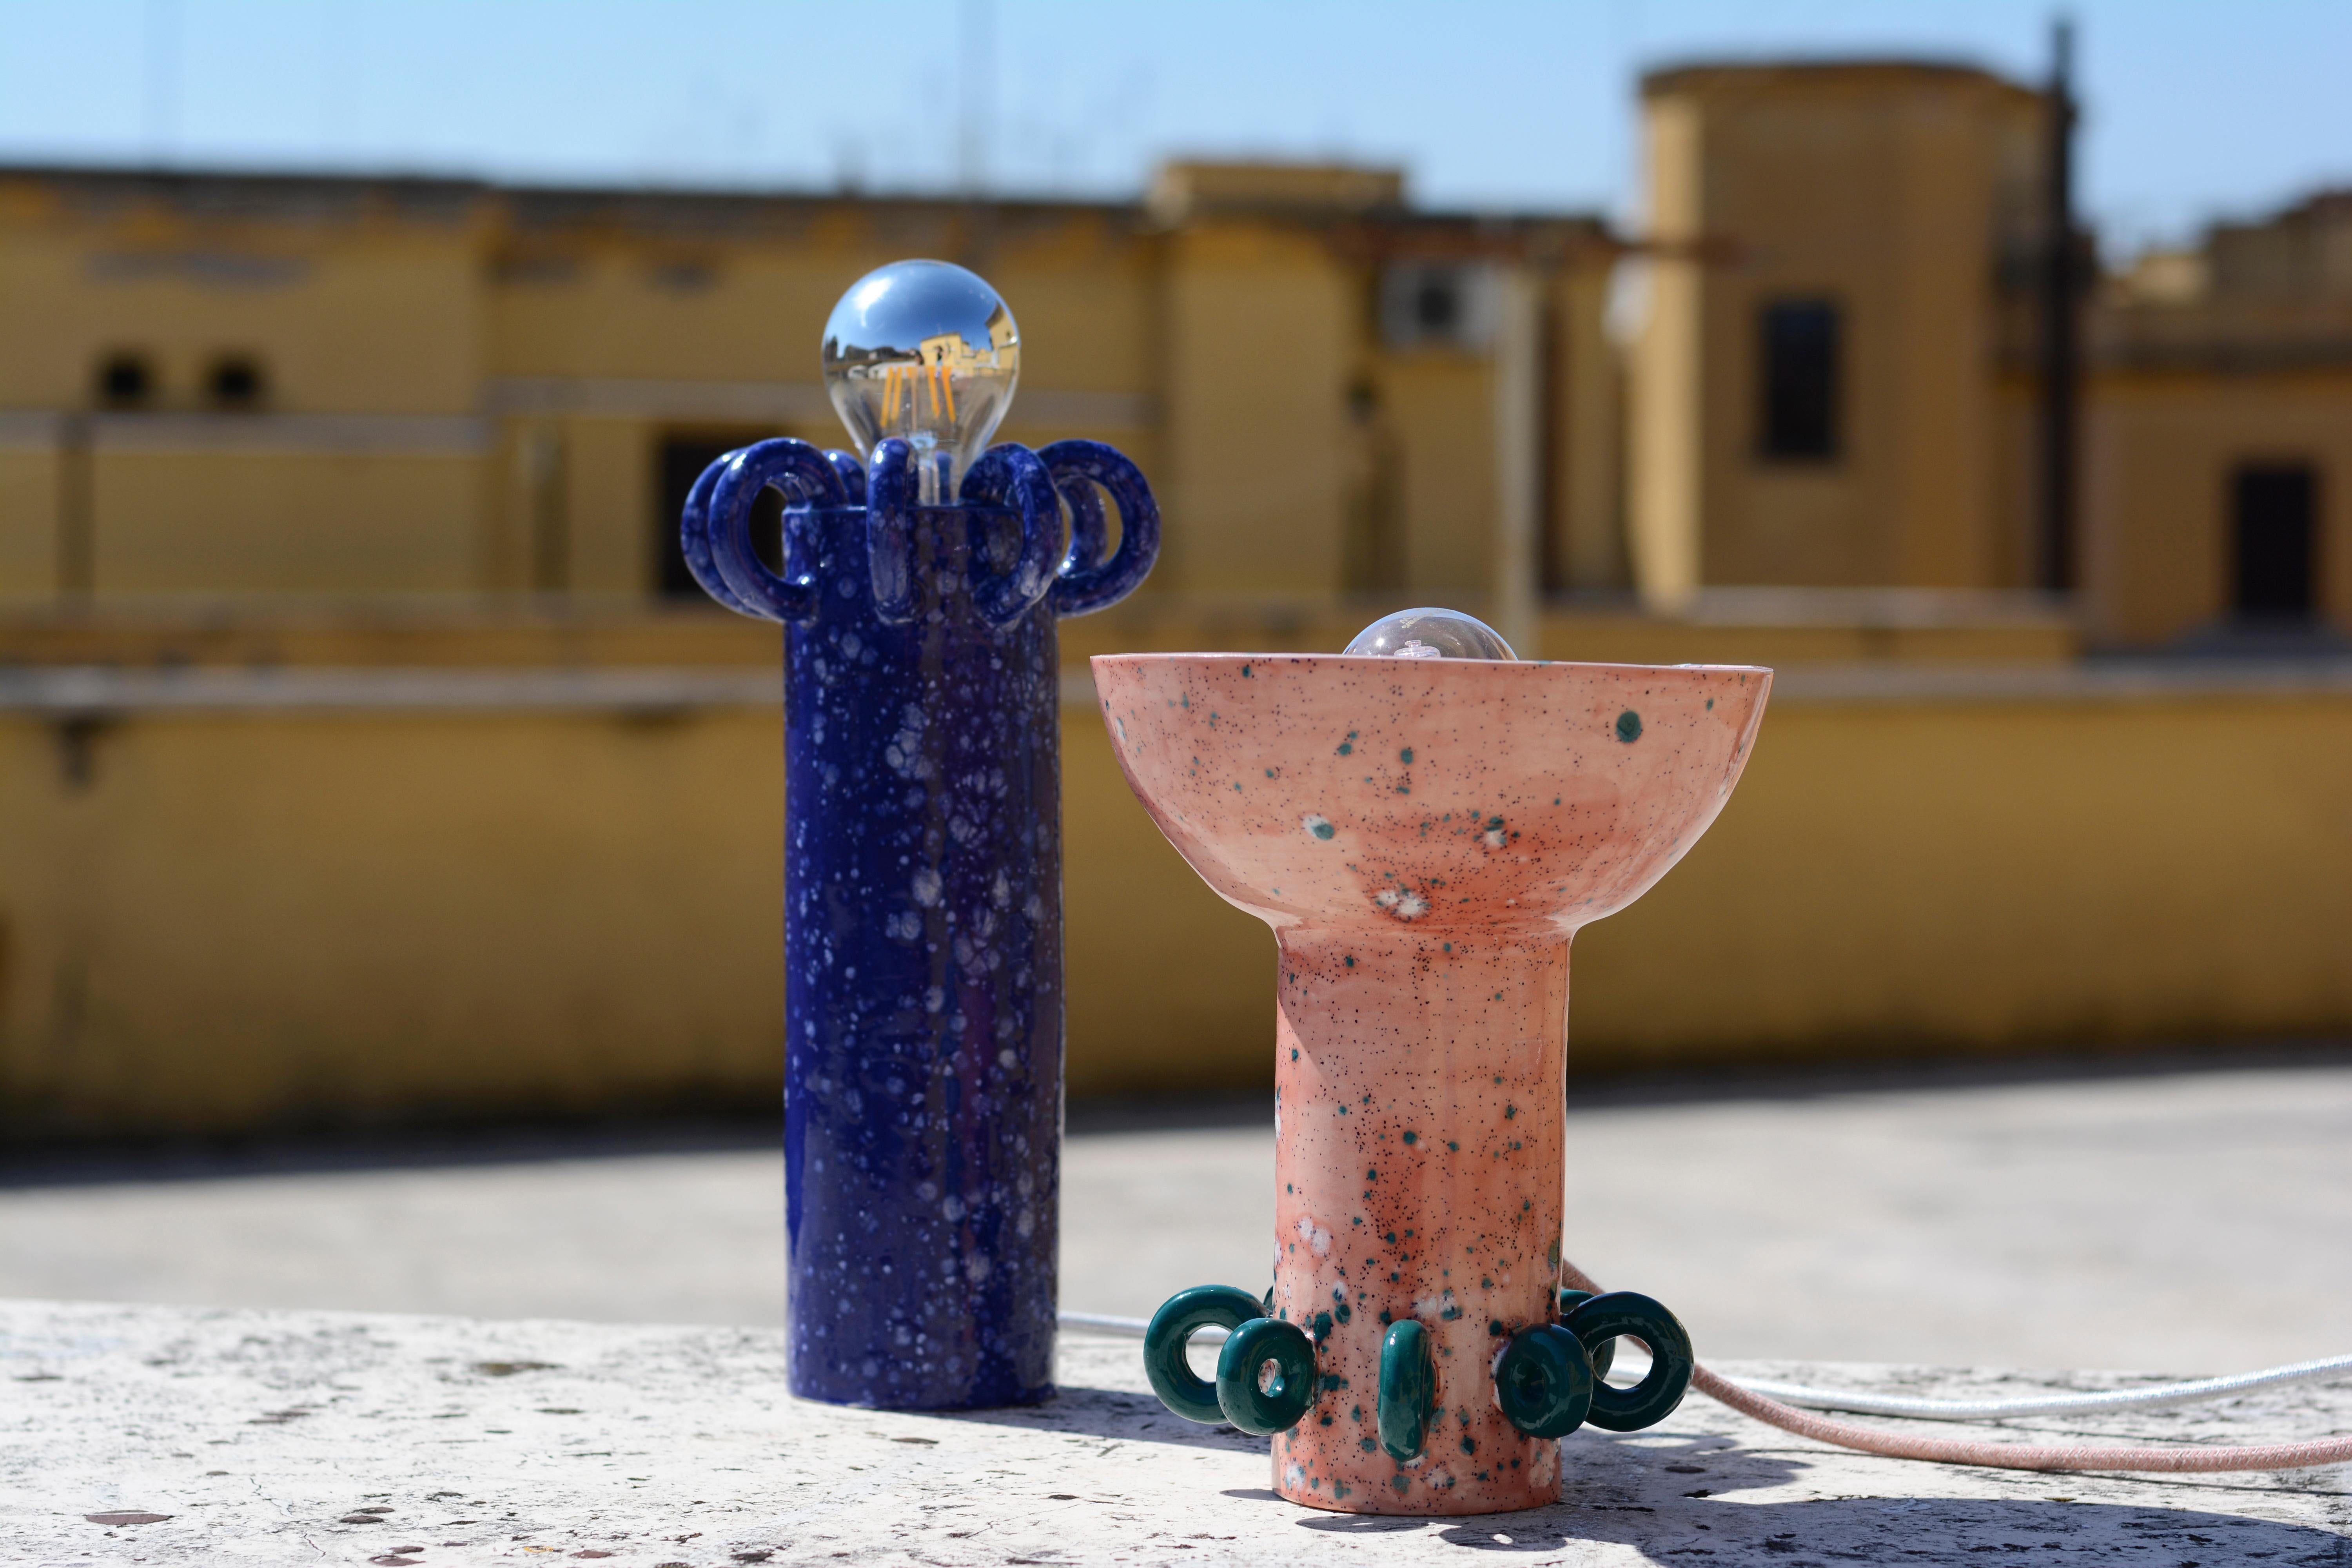 Sugo and Riva set of 2 Ceramic table lamps by Arianna De Luca
The Riva Lamp (blue) dimensions are H 30 cm x Diam 10 cm. Cable length: 1.5 m.
The Sugo Lamp (pink) dimensions are H 24 cm x Diam 16 cm. Cable length: 1.5 mCable length: 1.5 m.
Materials: